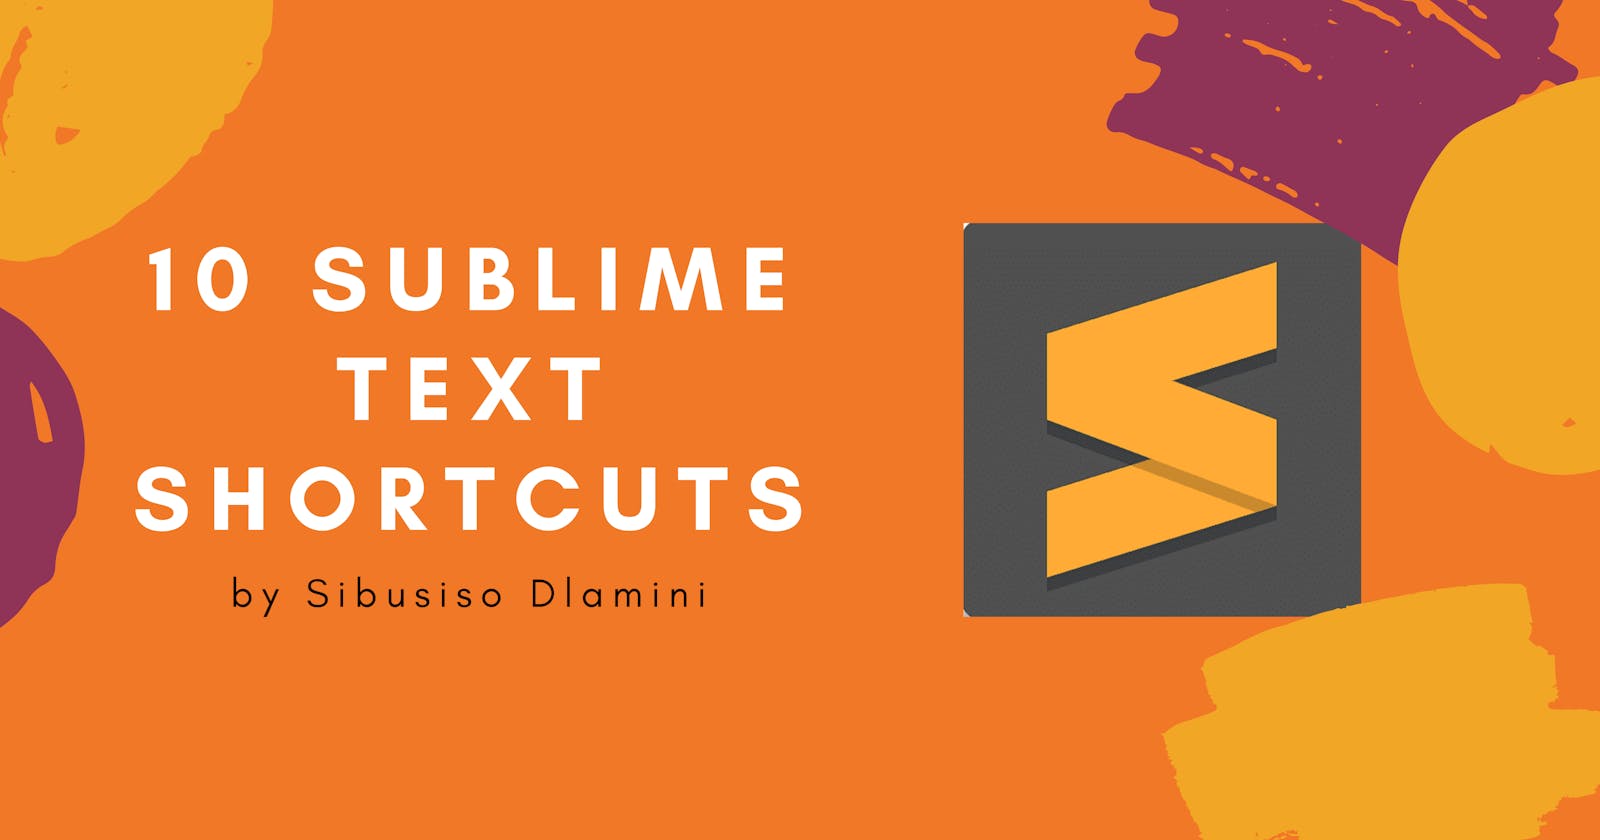 My Top 10 Sublime Text Shortcuts